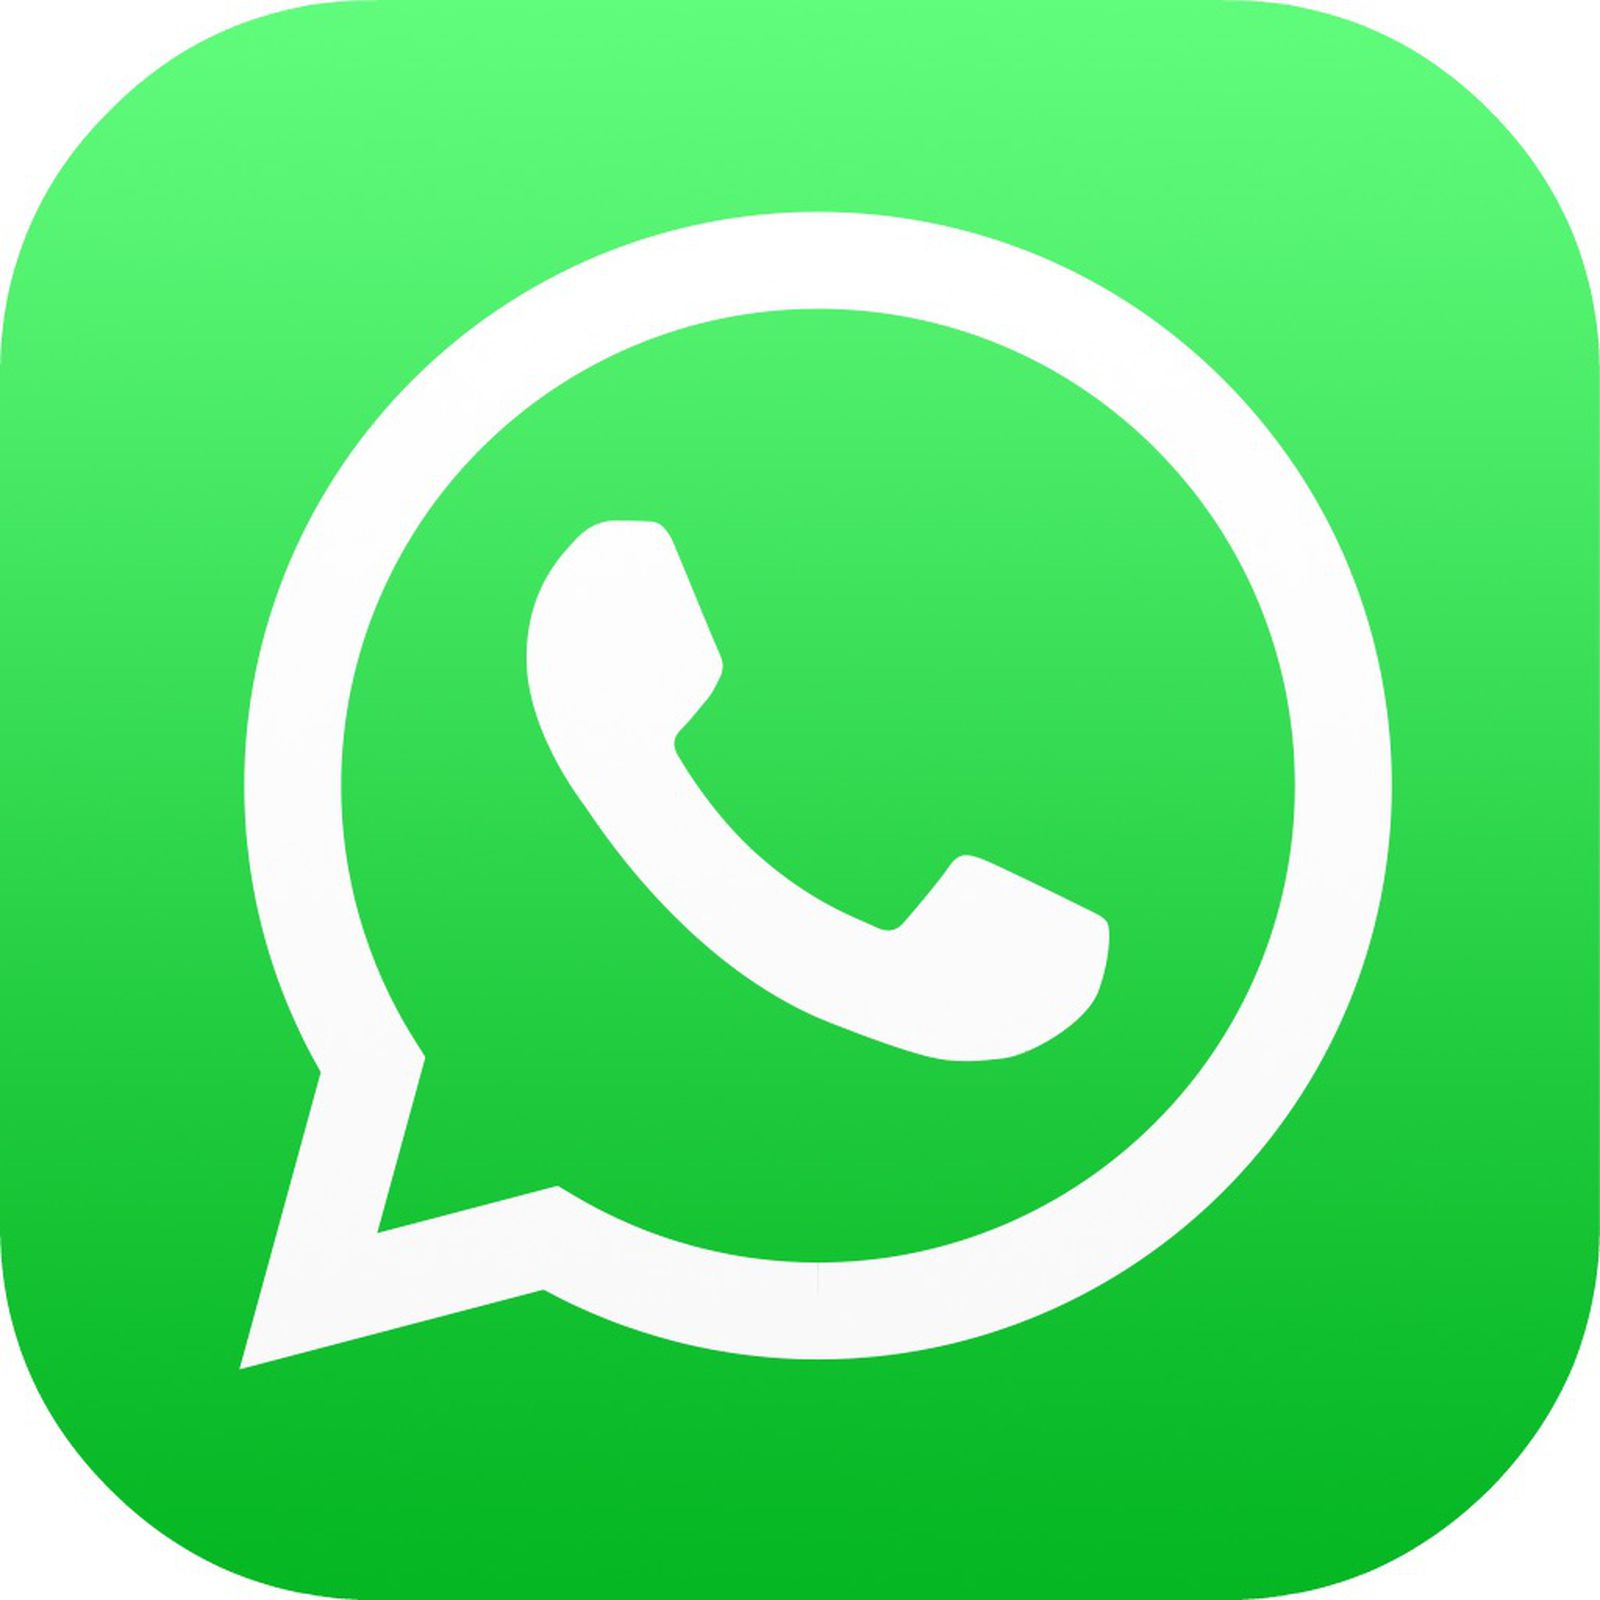 Mandatory updating of the WhatsApp privacy policy allows the sharing of user data with Facebook